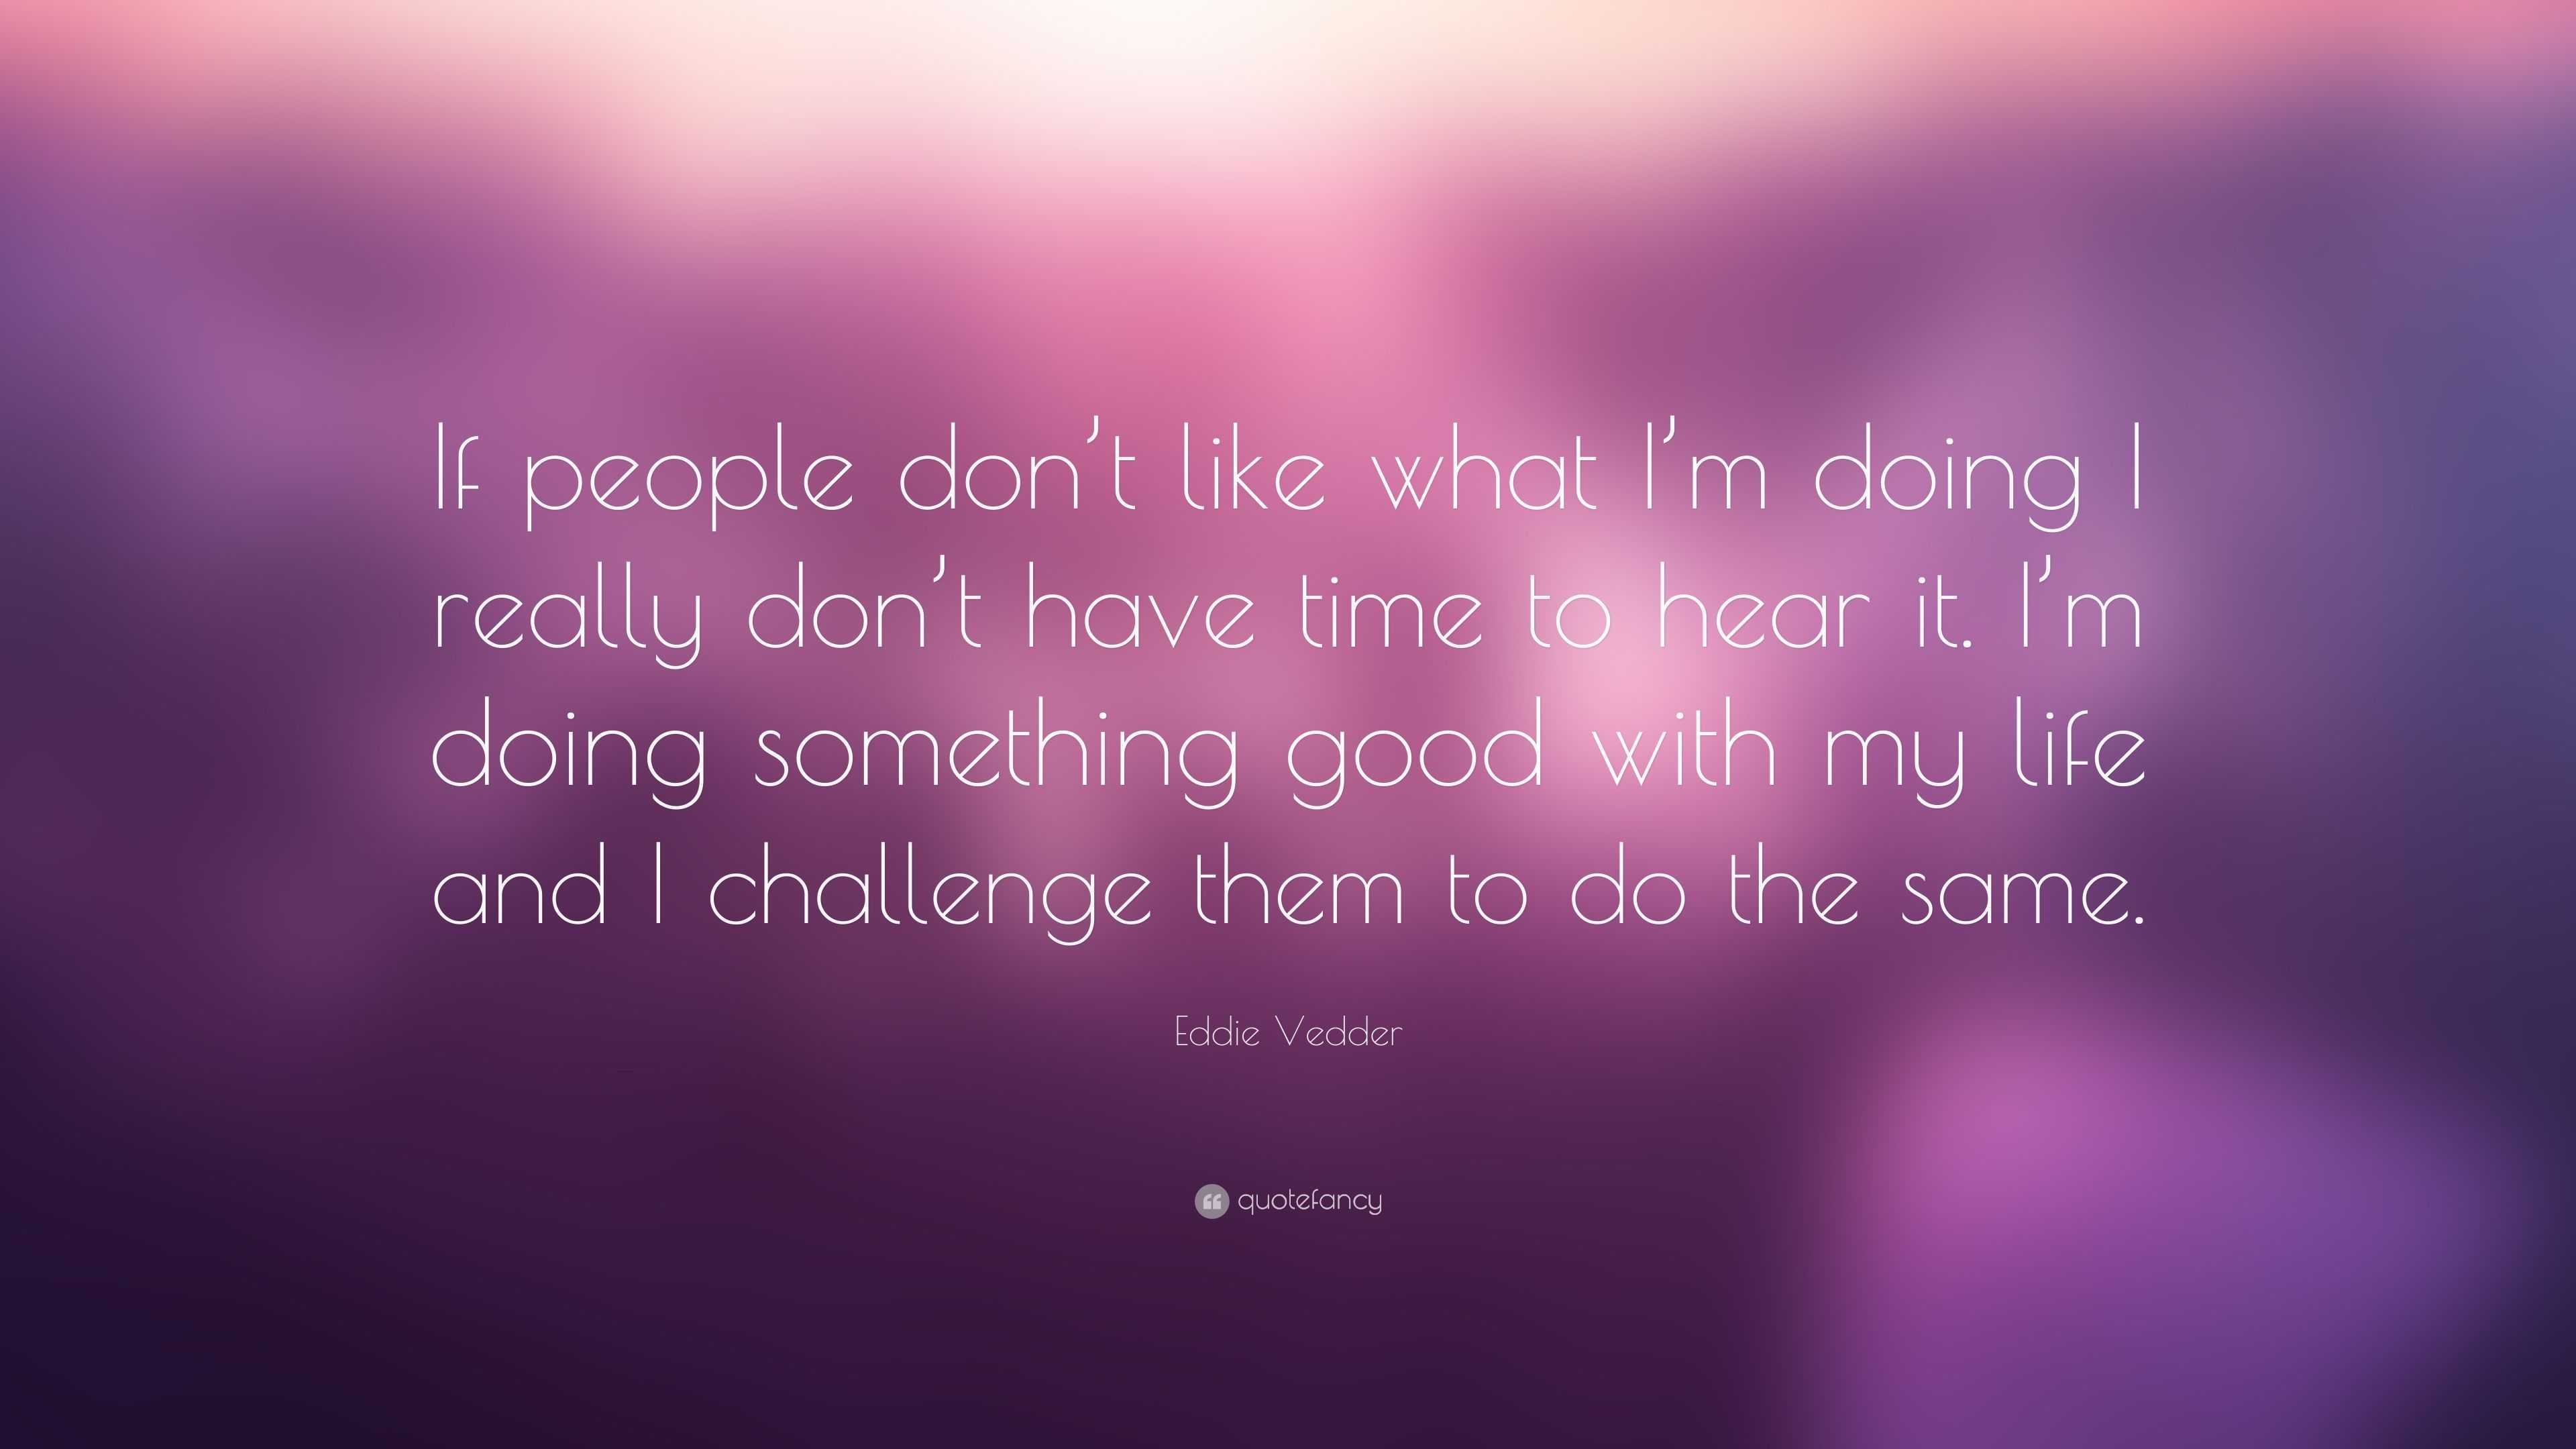 Eddie Vedder Quote: “If people don’t like what I’m doing I really don’t ...